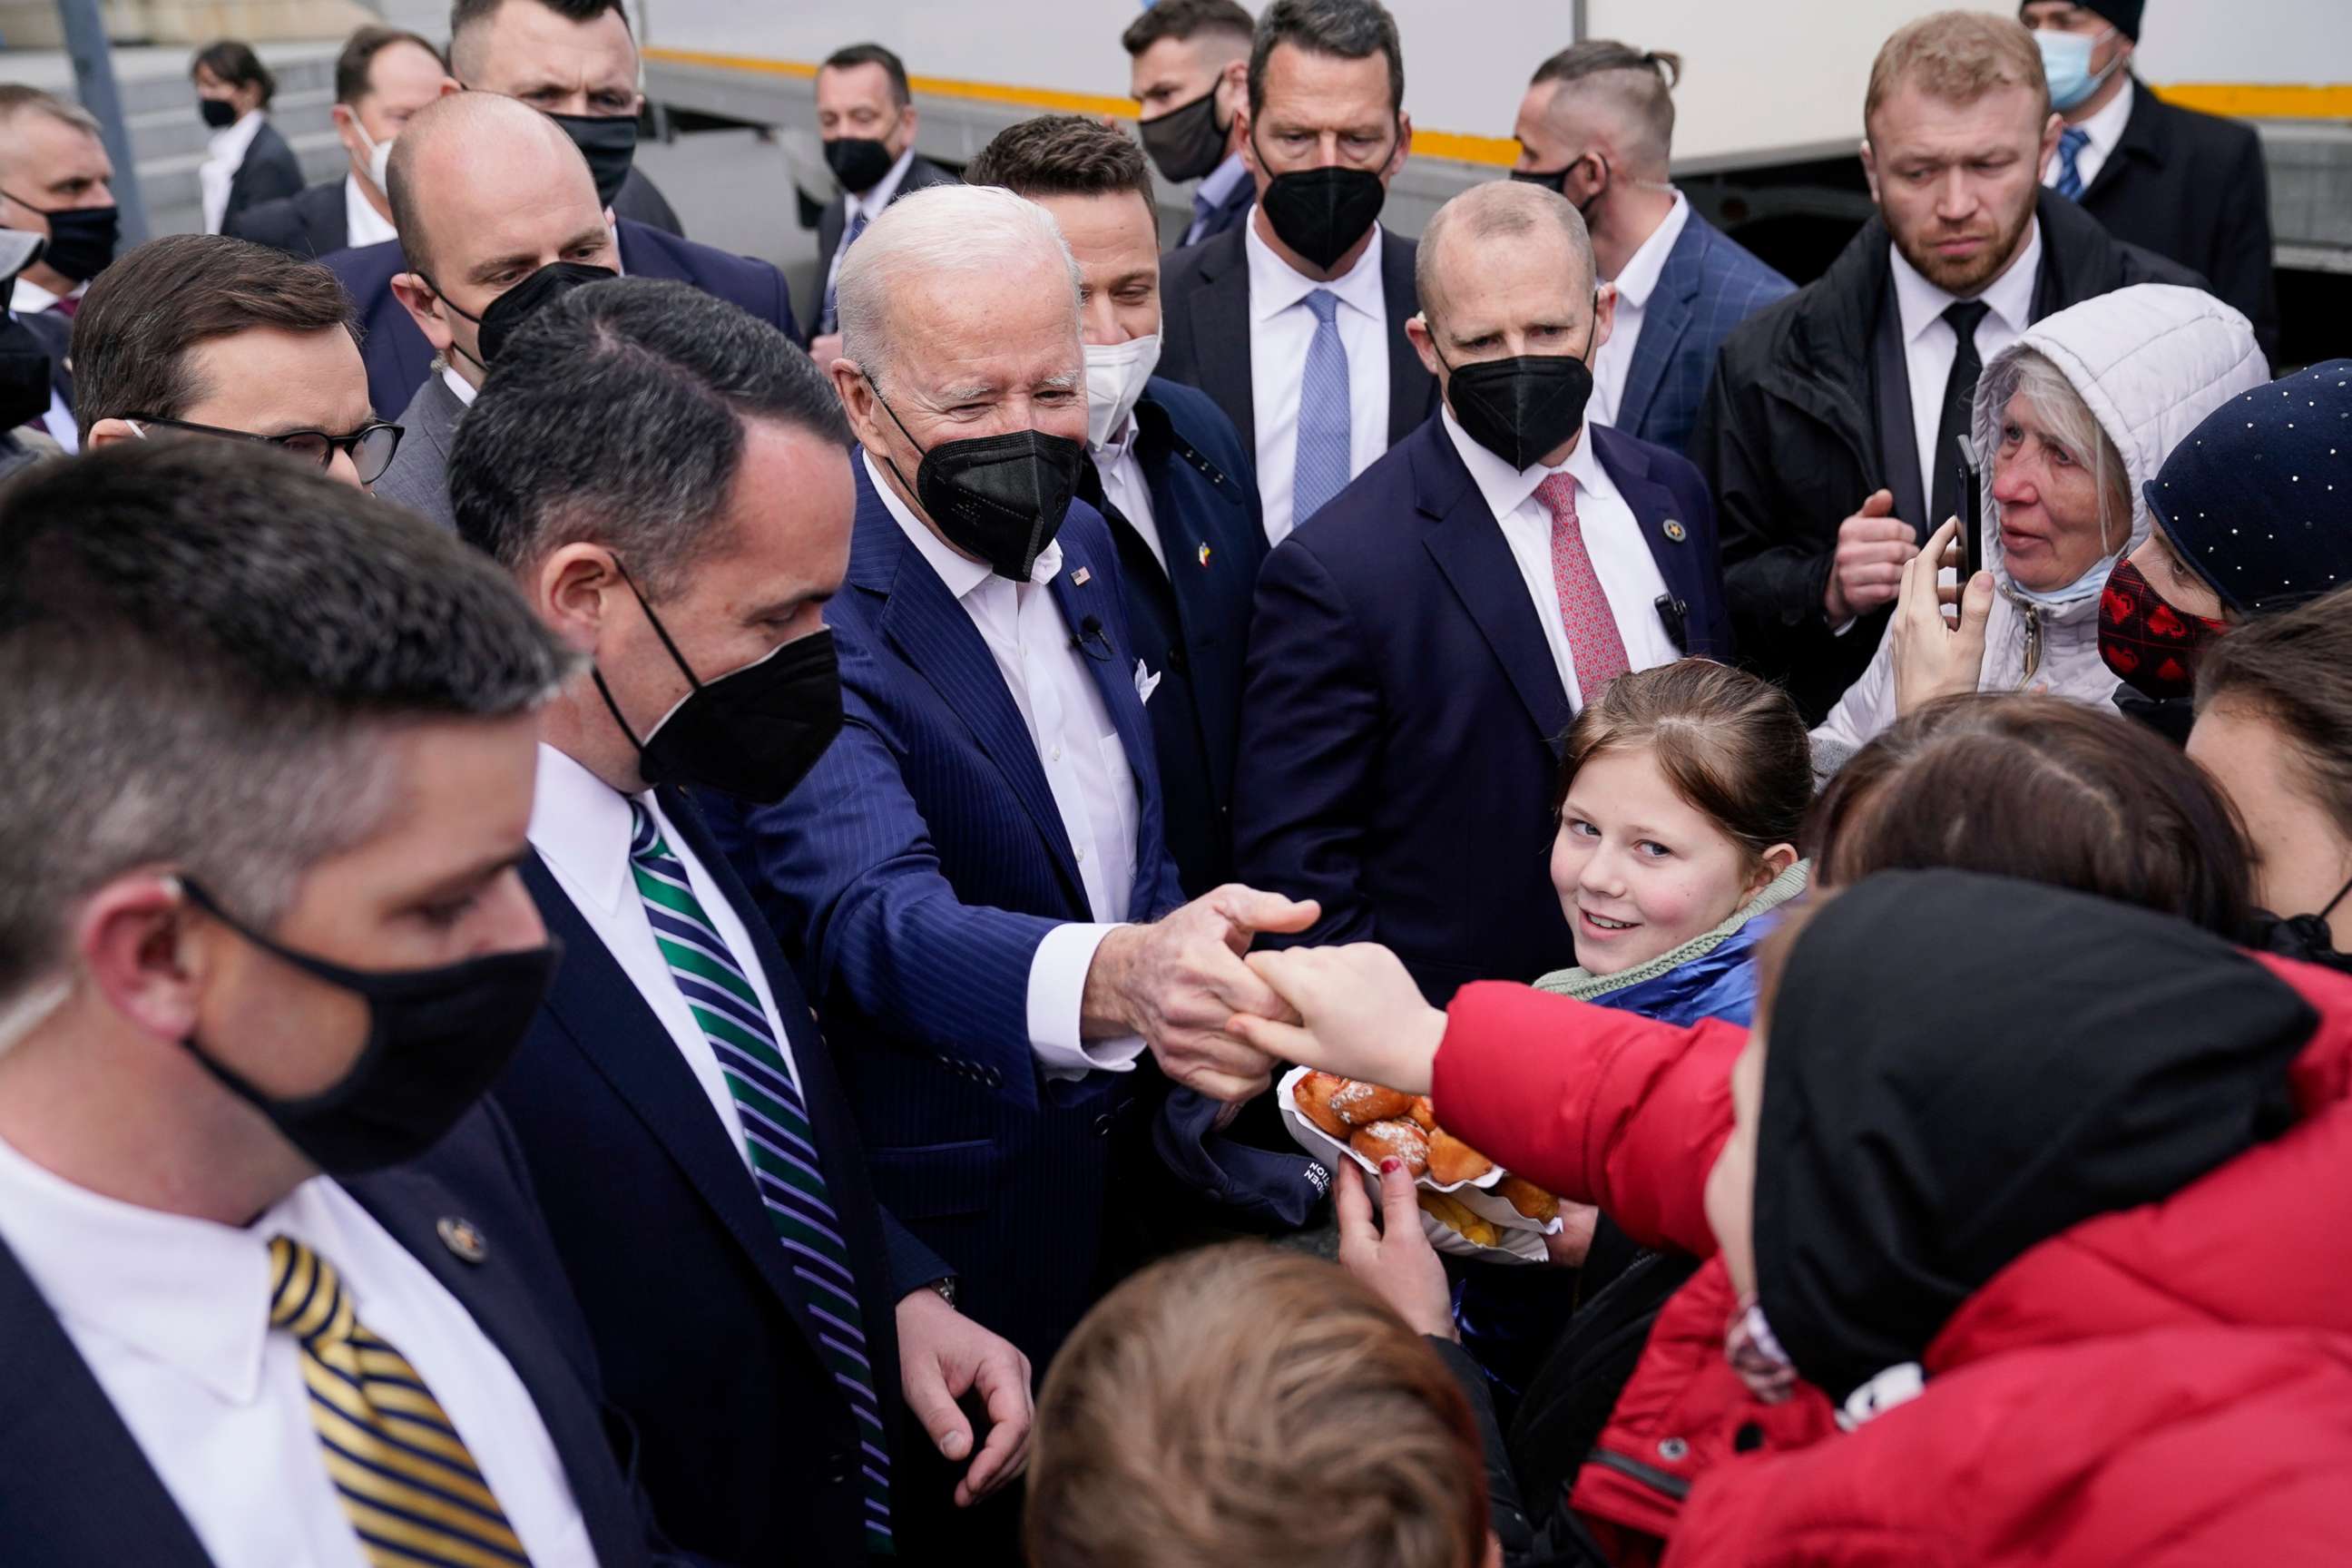 PHOTO: President Joe Biden meets with Ukrainian refugees and humanitarian aid workers during a visit to PGE Narodowy Stadium, on March 26, 2022, in Warsaw.